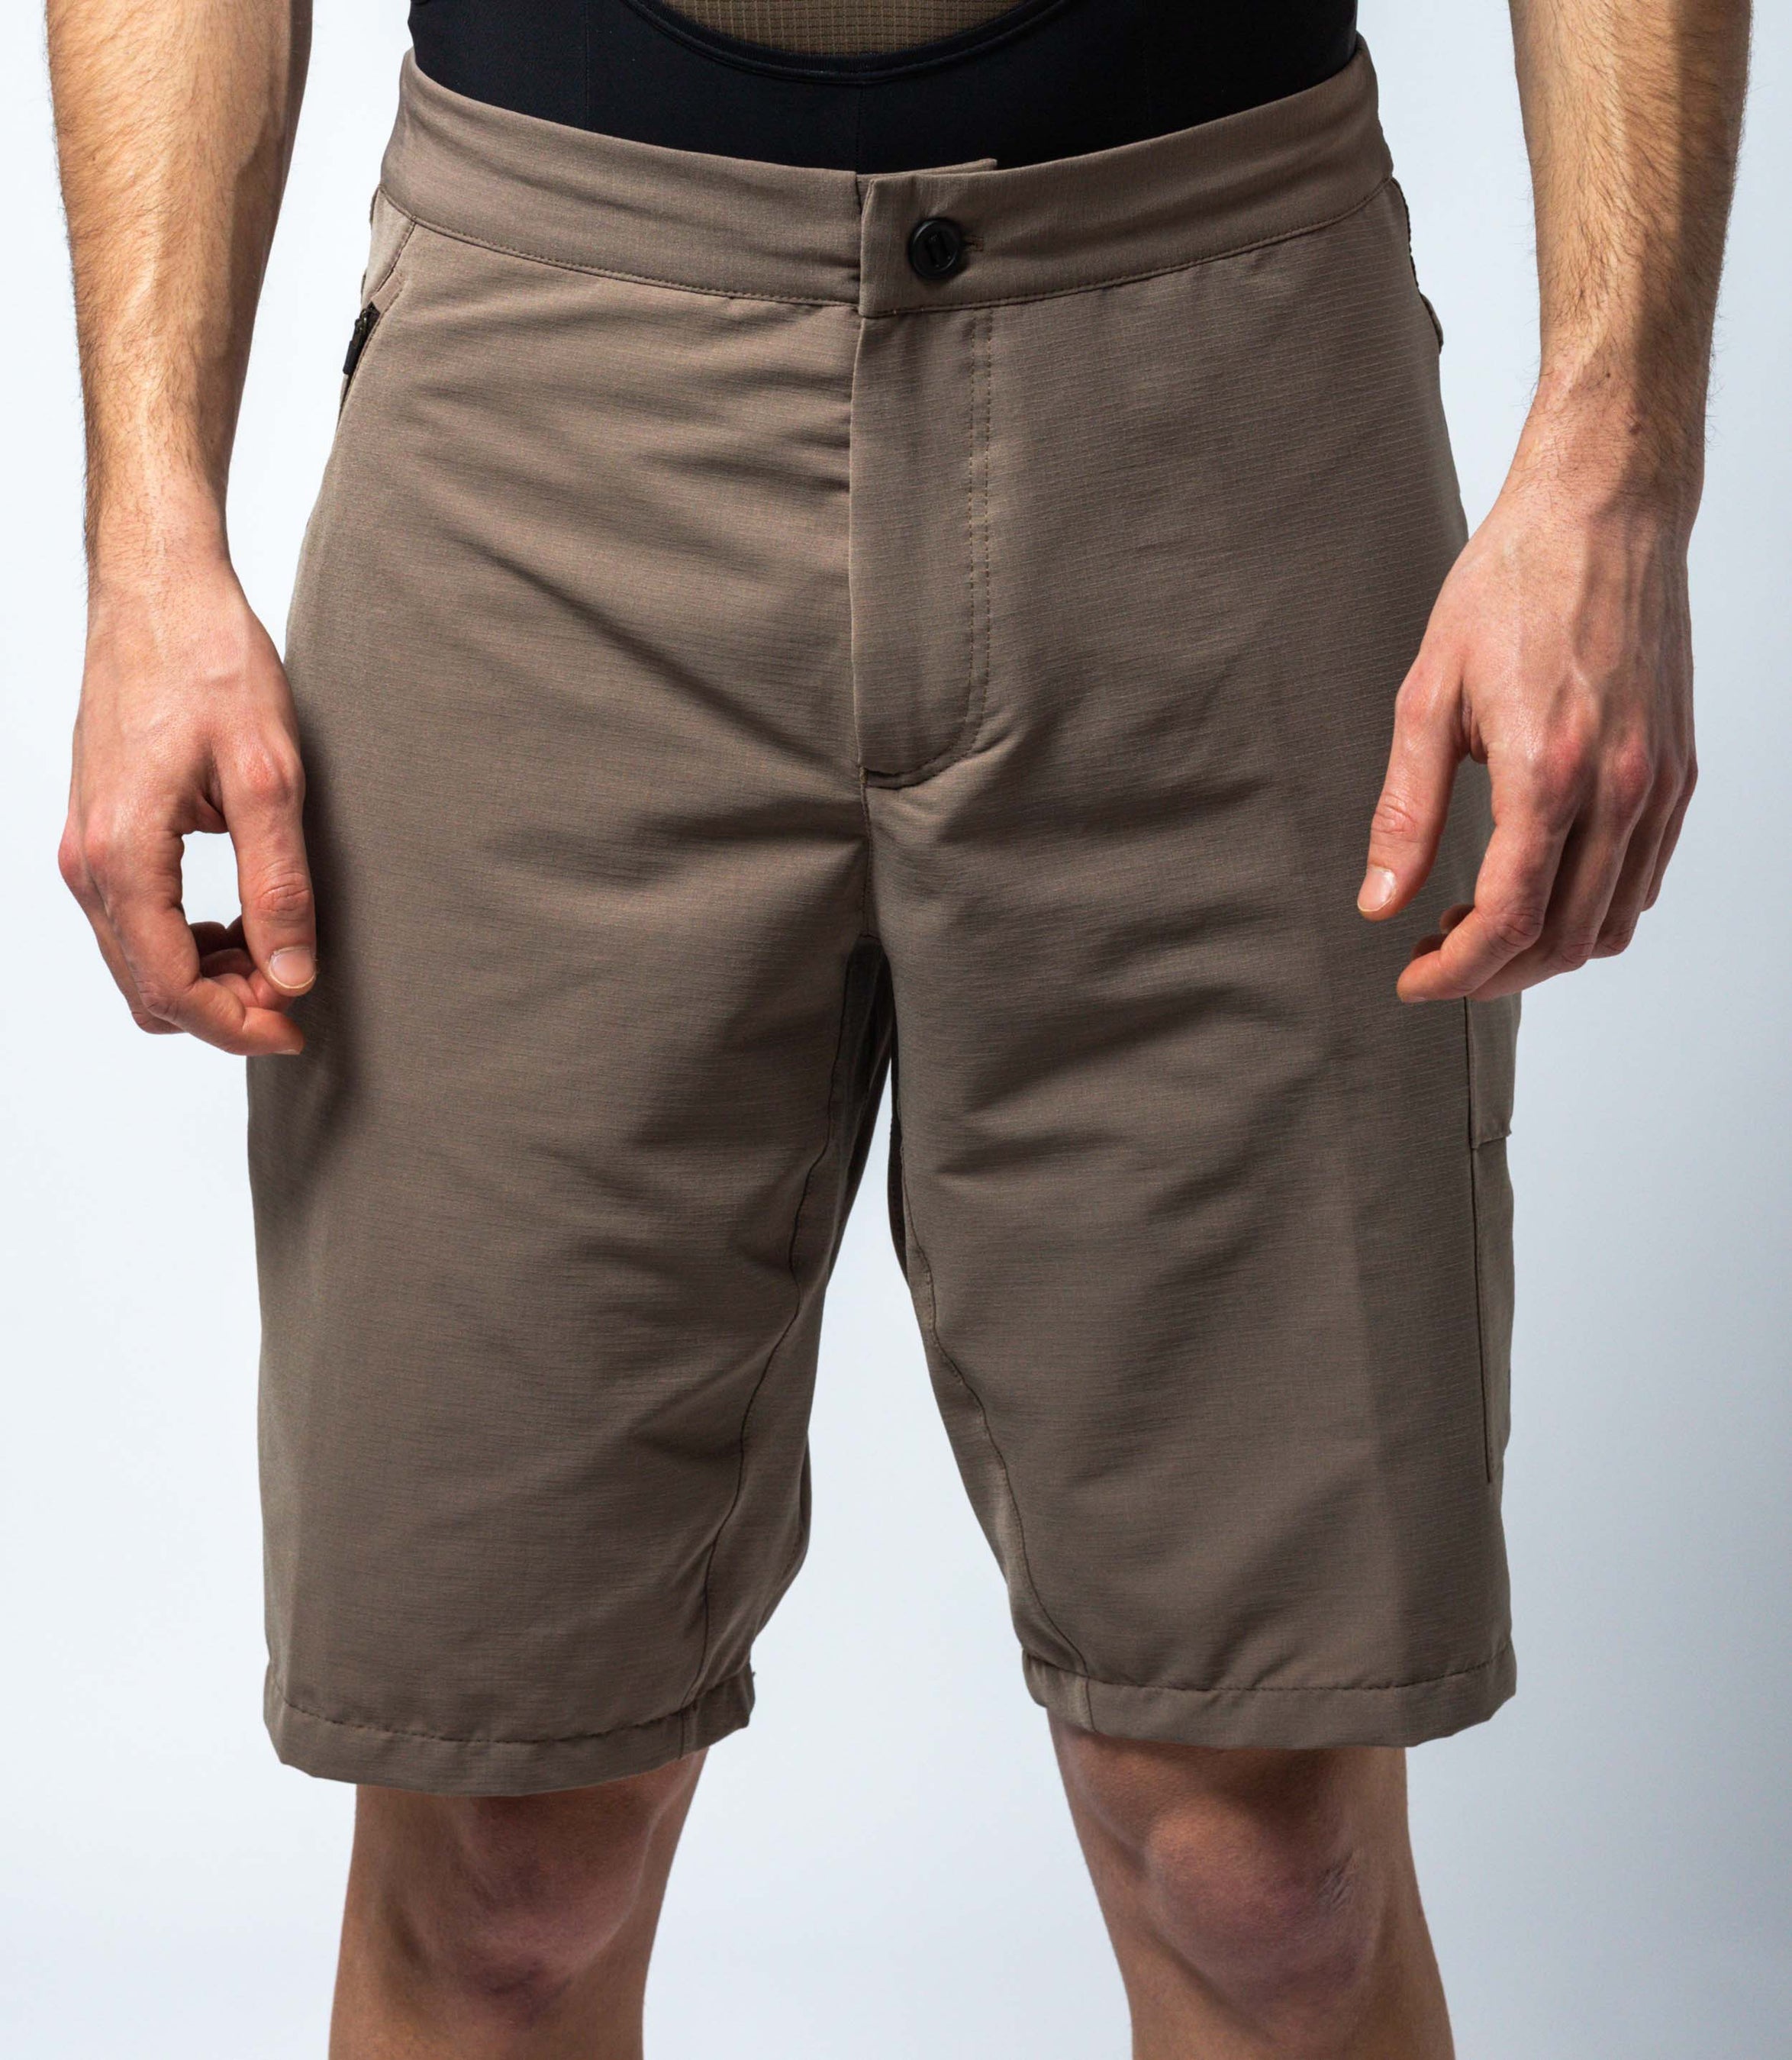 23SSHJA80PE_5_cycling shorts bikepacking brown jary front pedaled